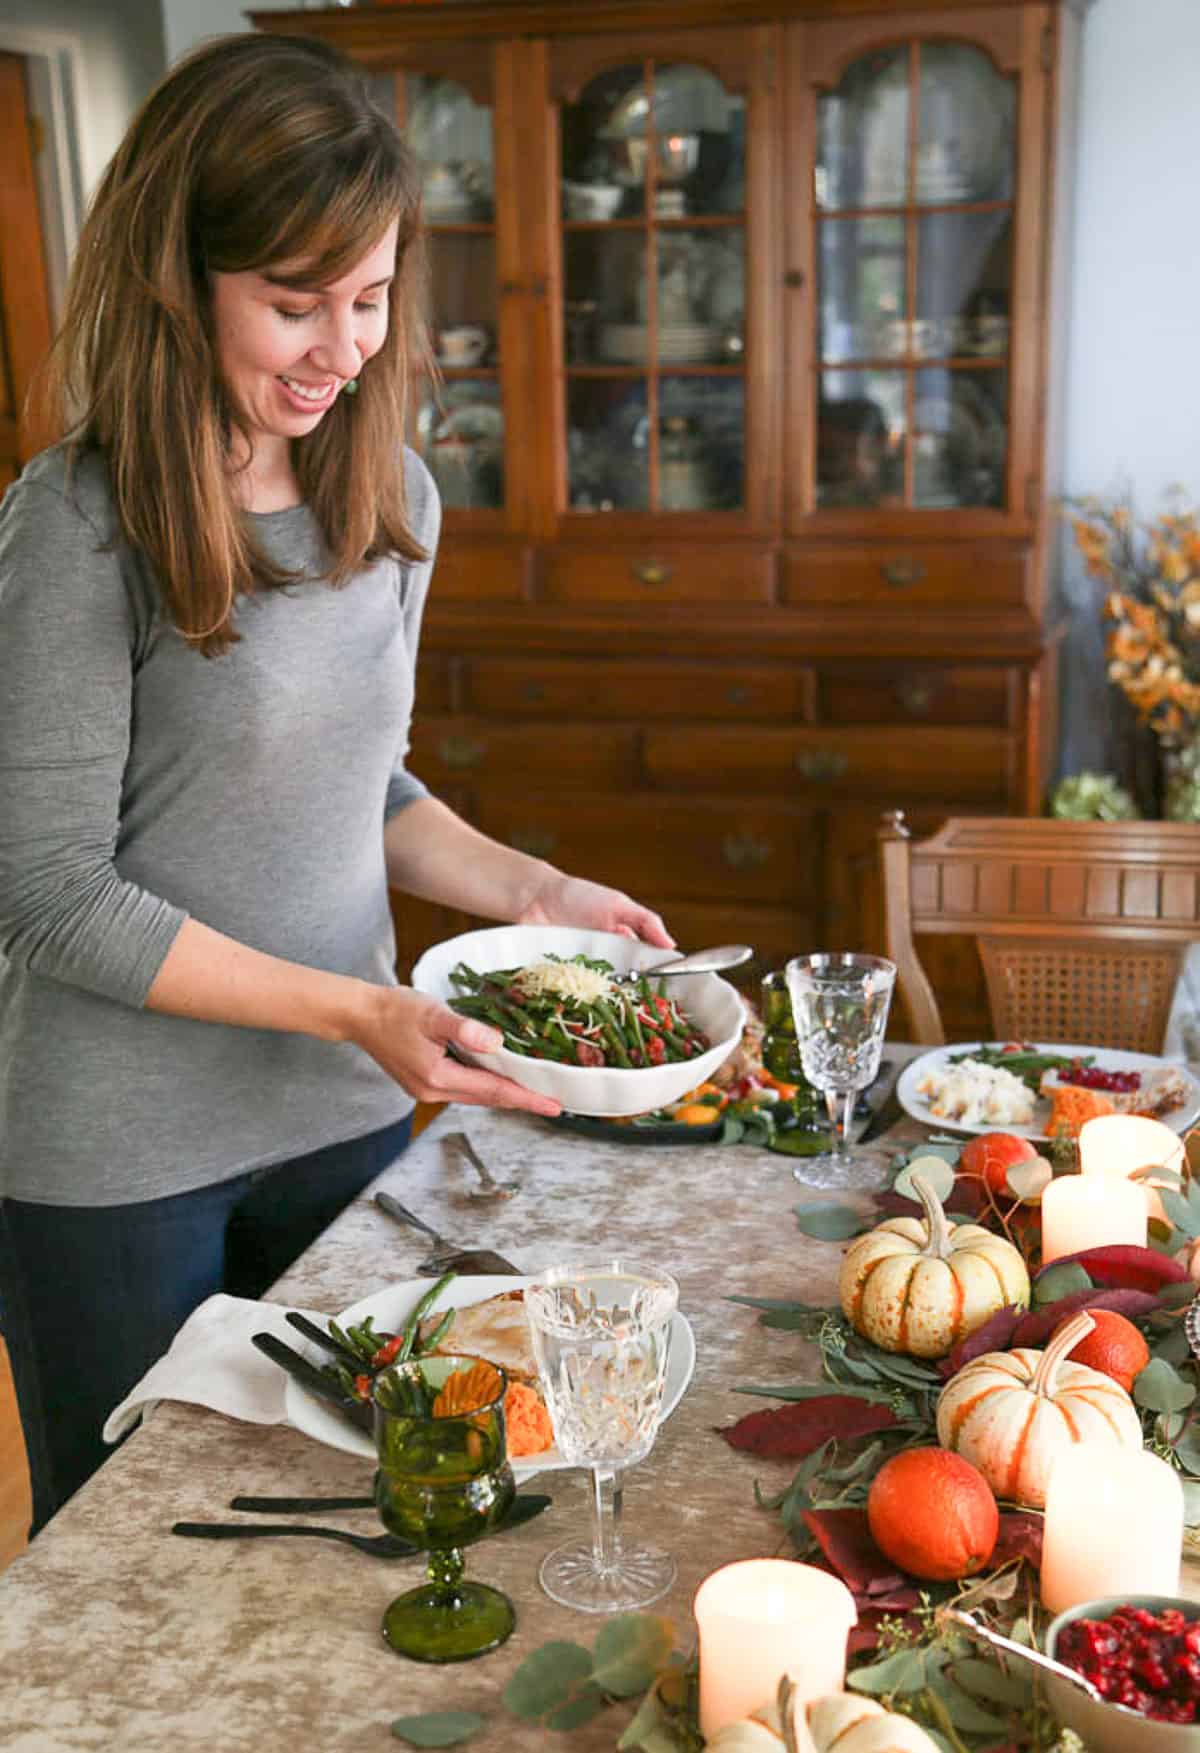 woman holding a bowl of green beans, about to place it on a dining table set for thanksgiving.